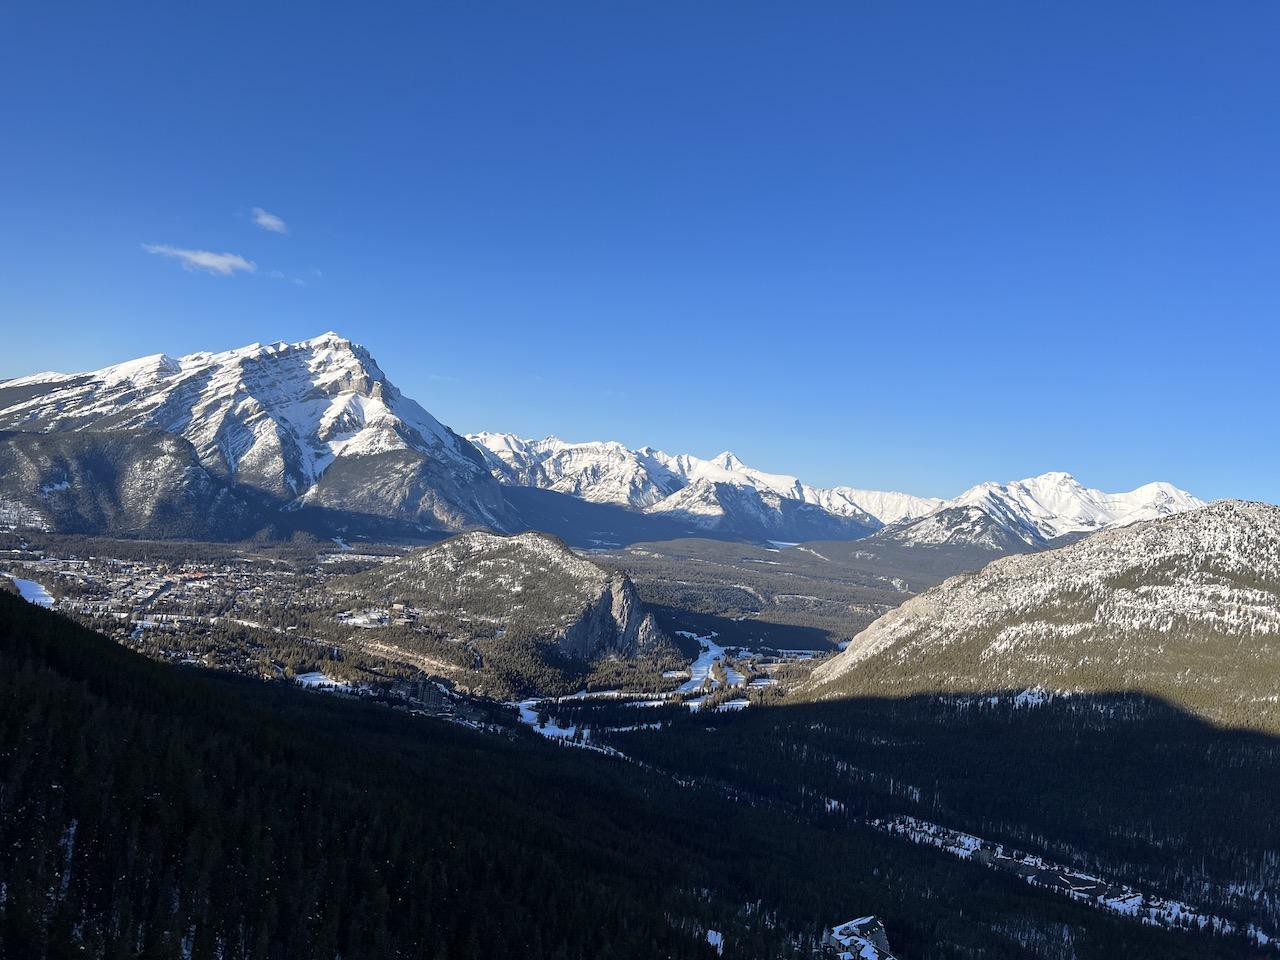 A view of the Banff townsite in Alberta's Banff National Park.